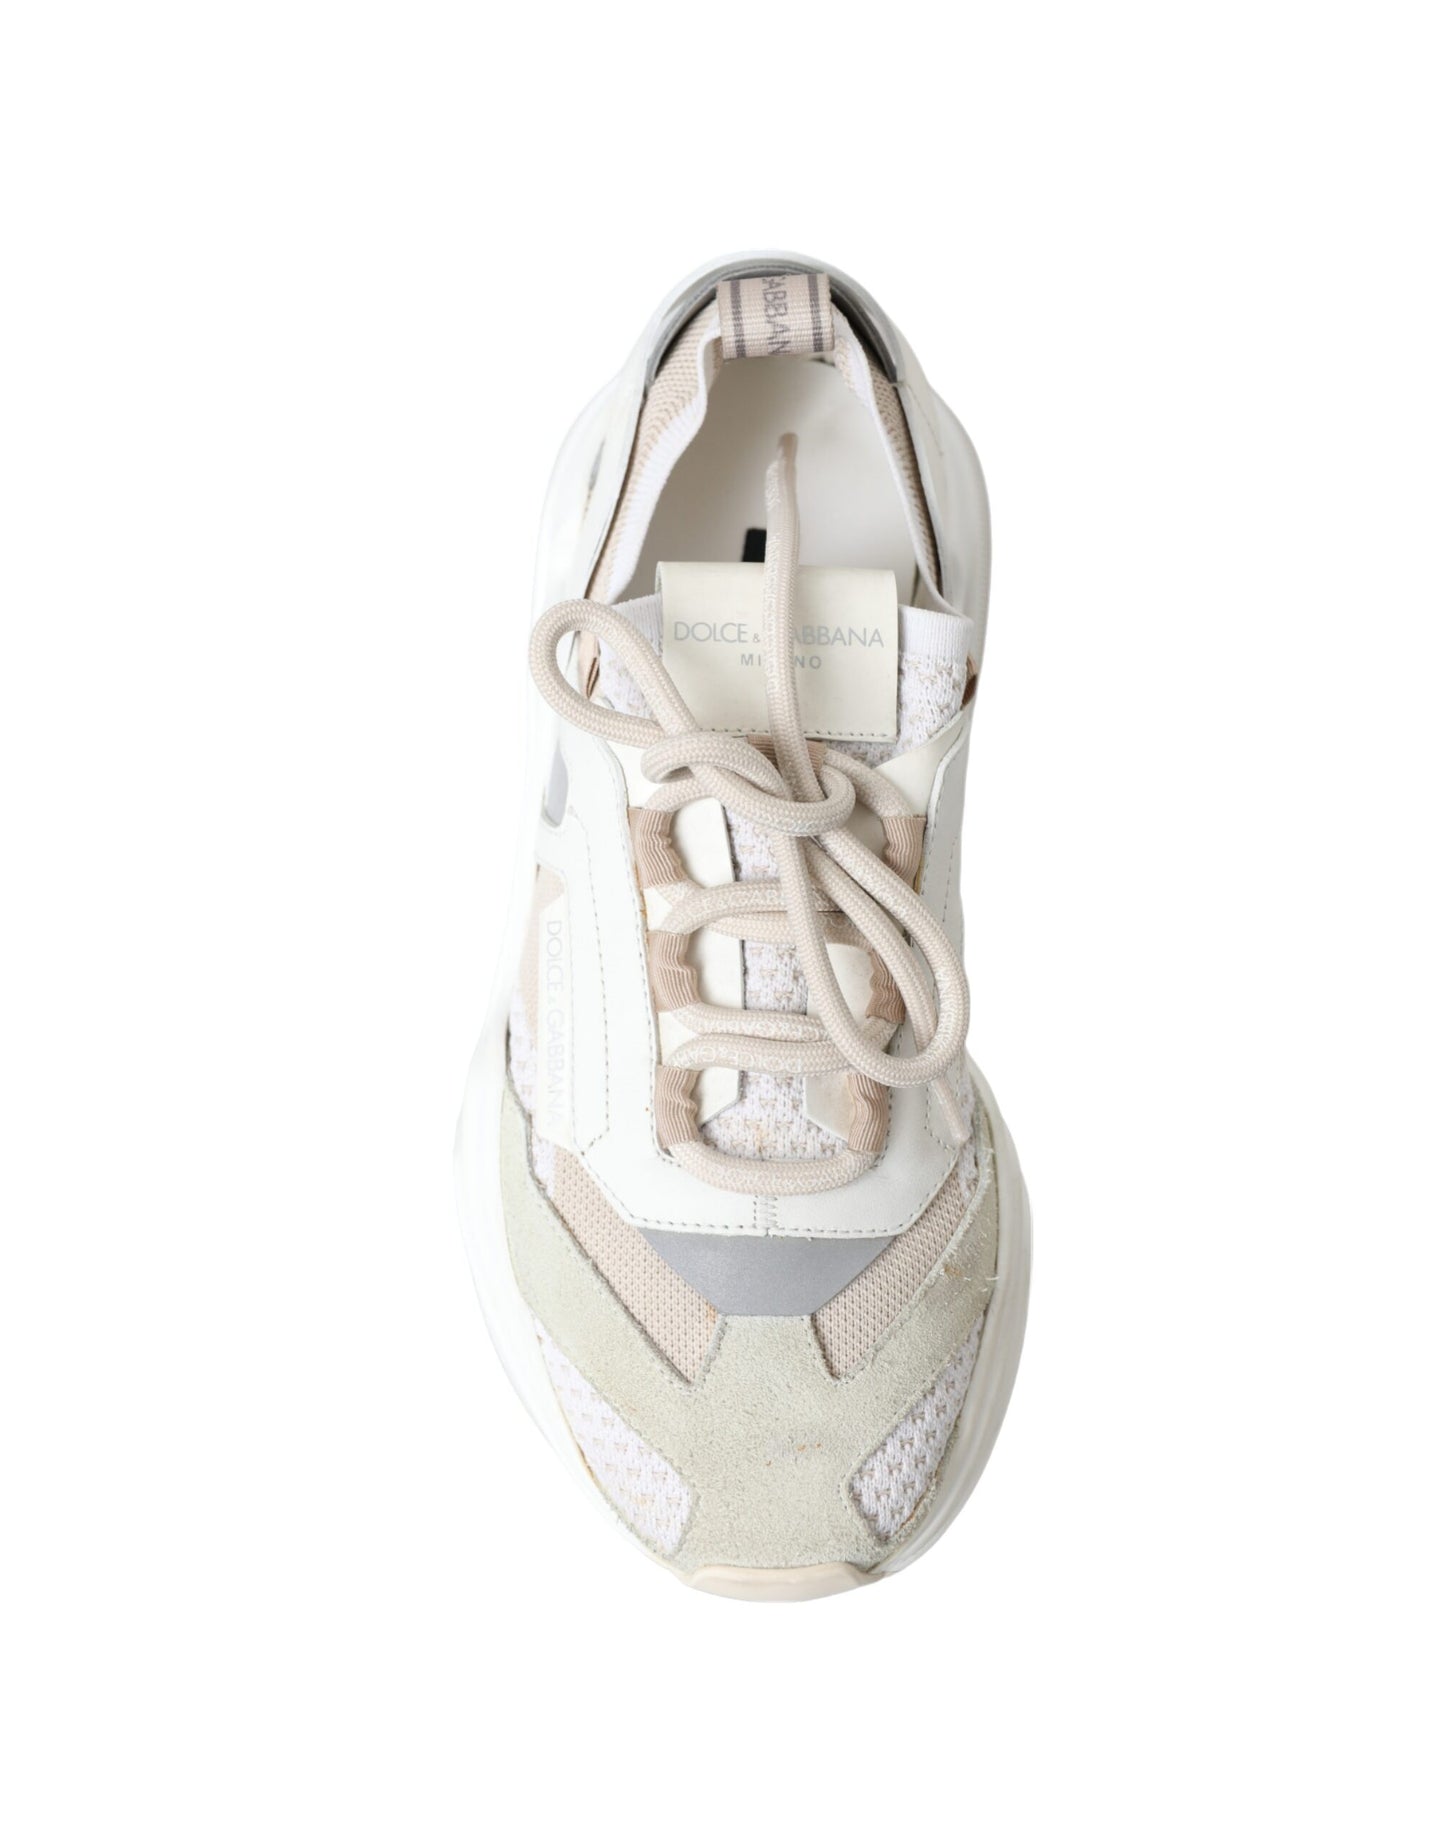 Dolce & Gabbana Exquisite Multicolor Daymaster Lace-Up Sneakers